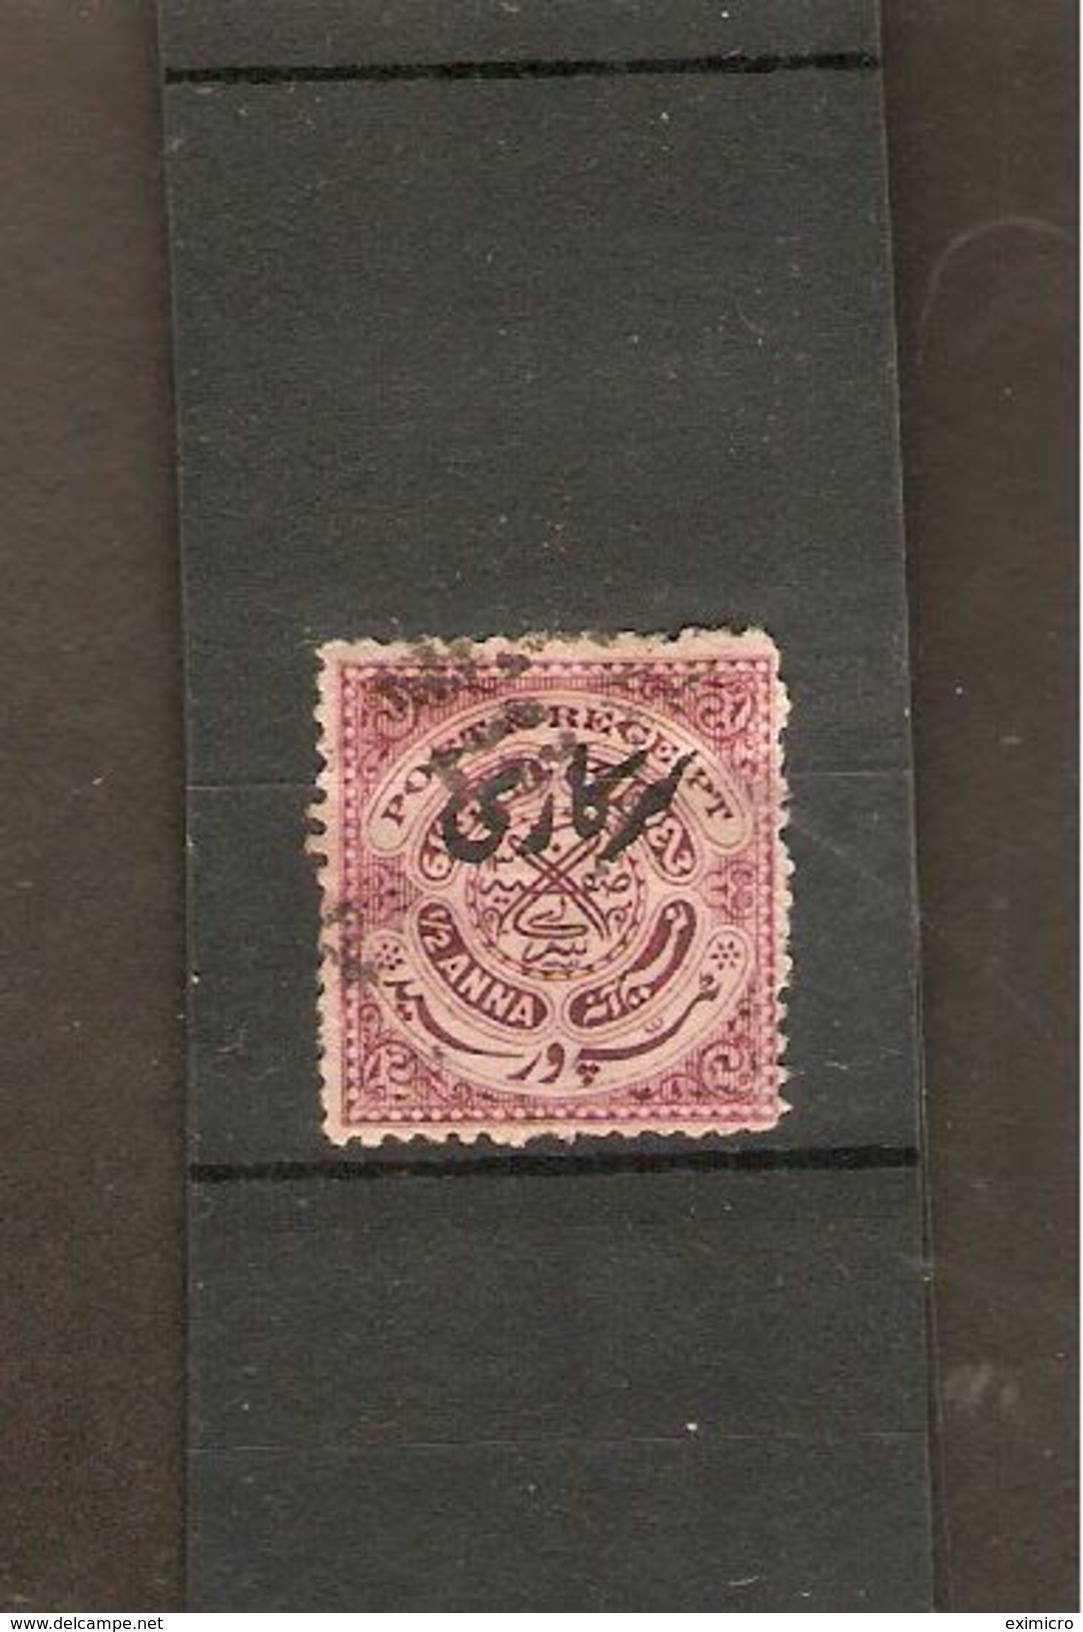 INDIA - HYDERABAD 1947 ½a OFFICIAL SG O54 FINE USED Cat £8 - Hyderabad